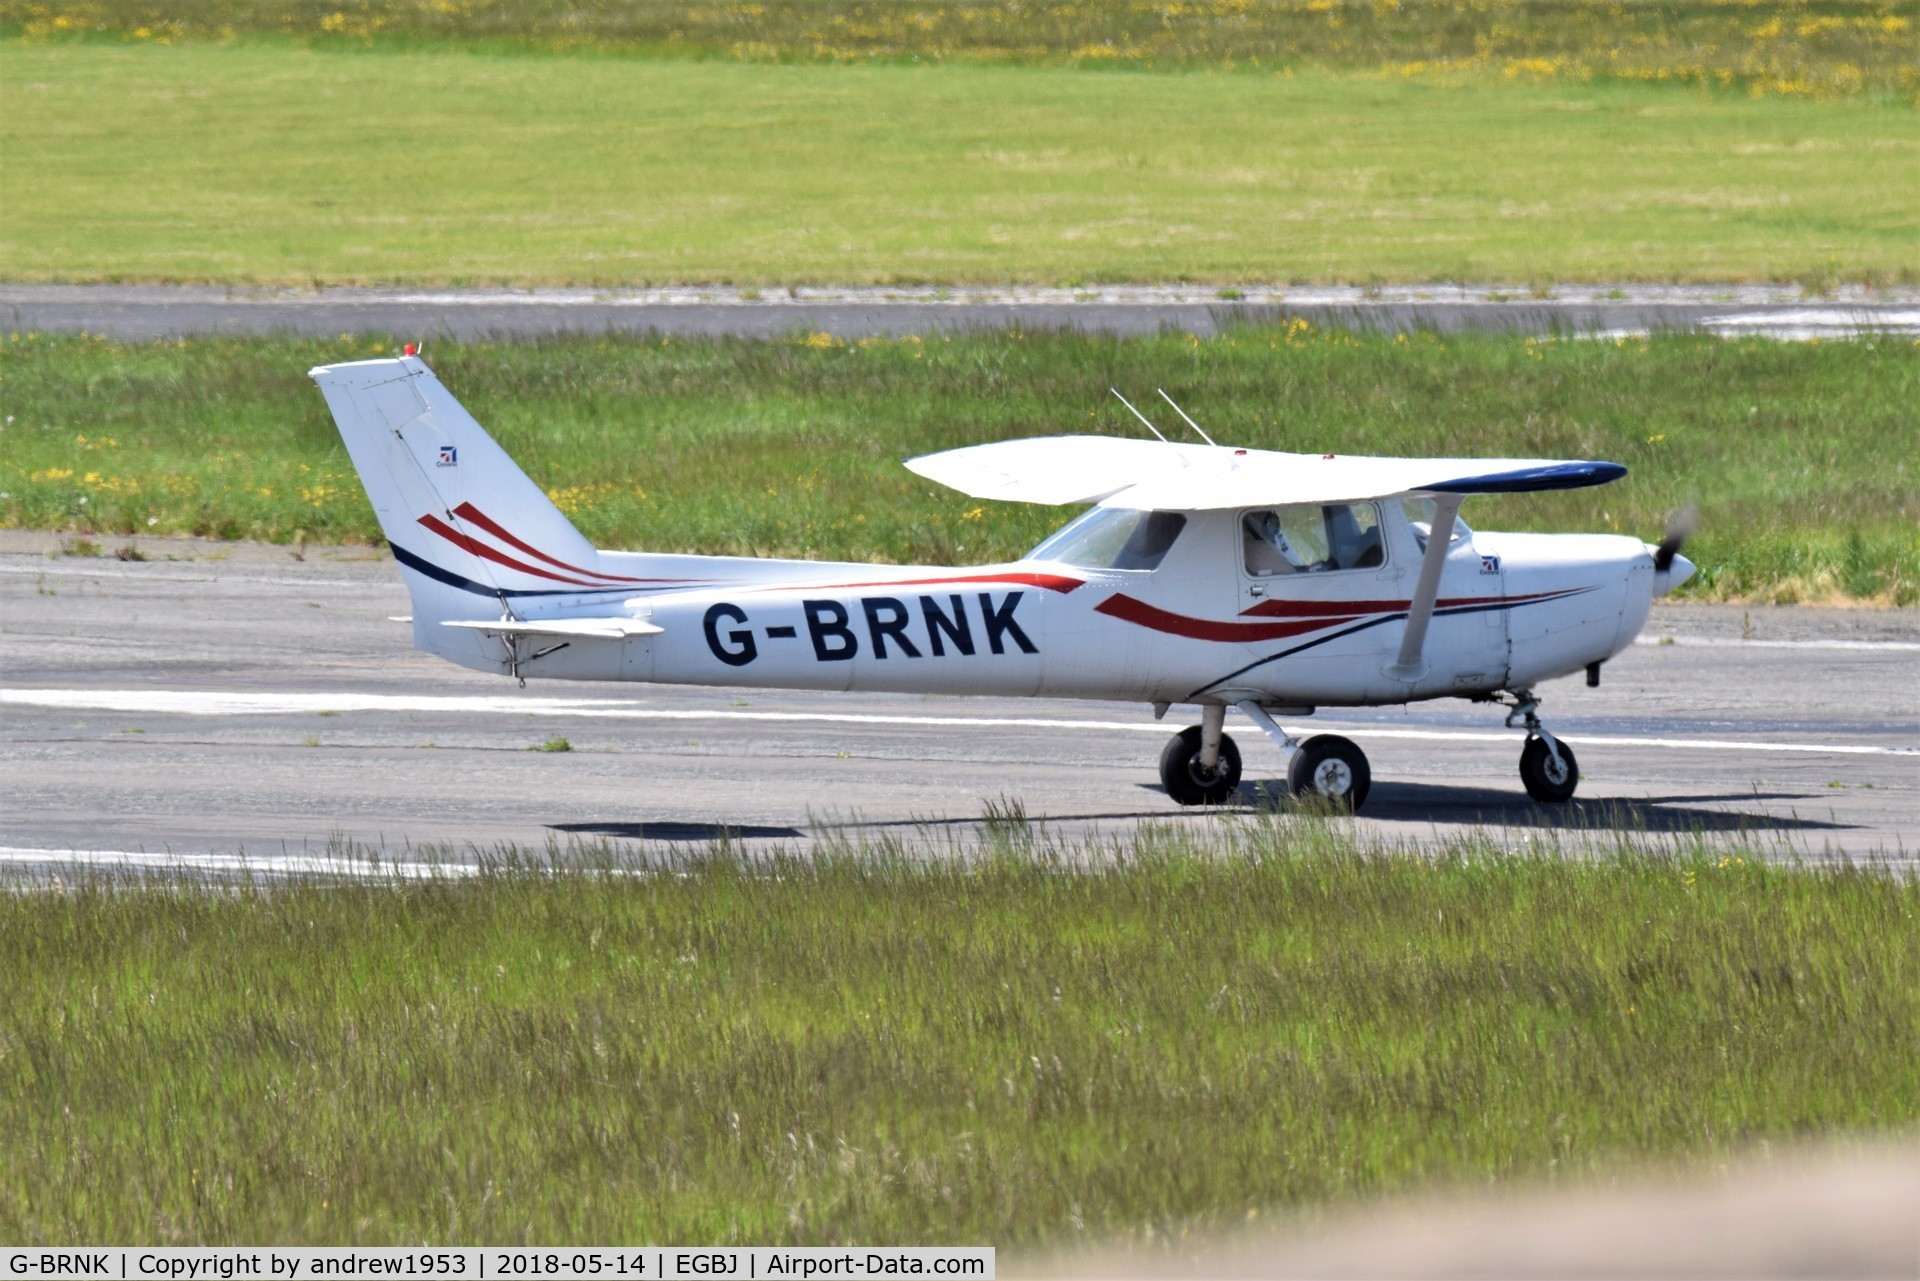 G-BRNK, 1977 Cessna 152 C/N 152-80479, G-BRNK at Gloucestershire Airport.